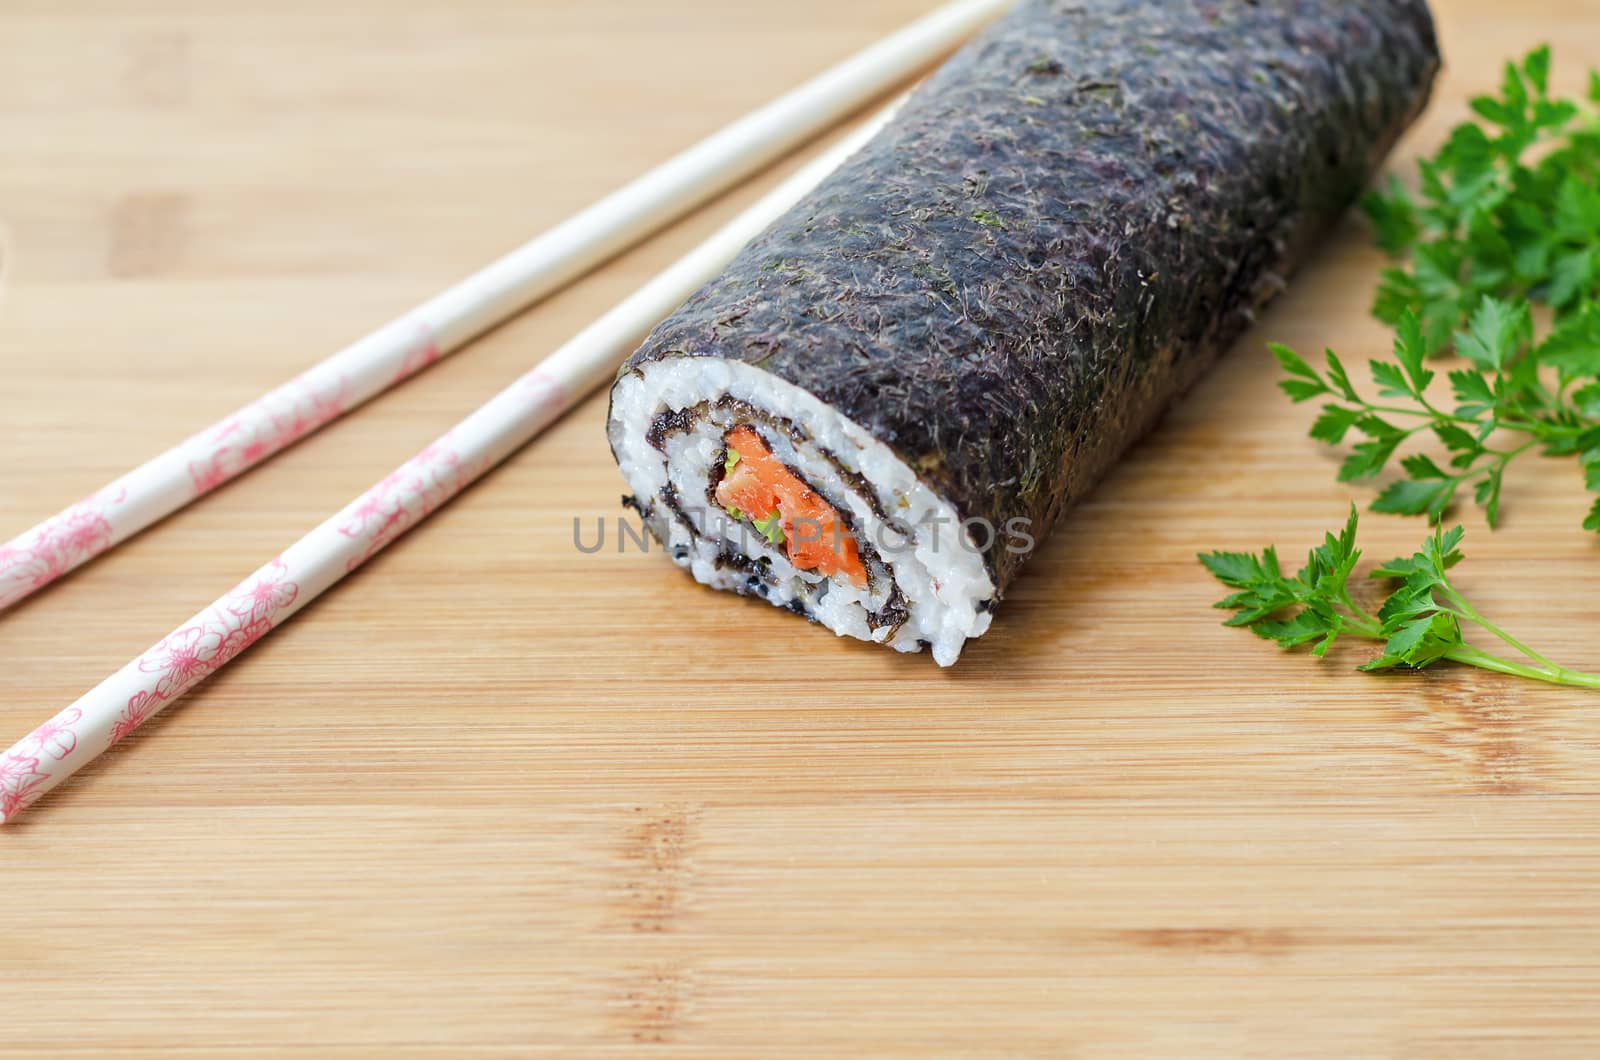 Rolls with salmon, a large piece, parsley and chopsticks on wooden background.